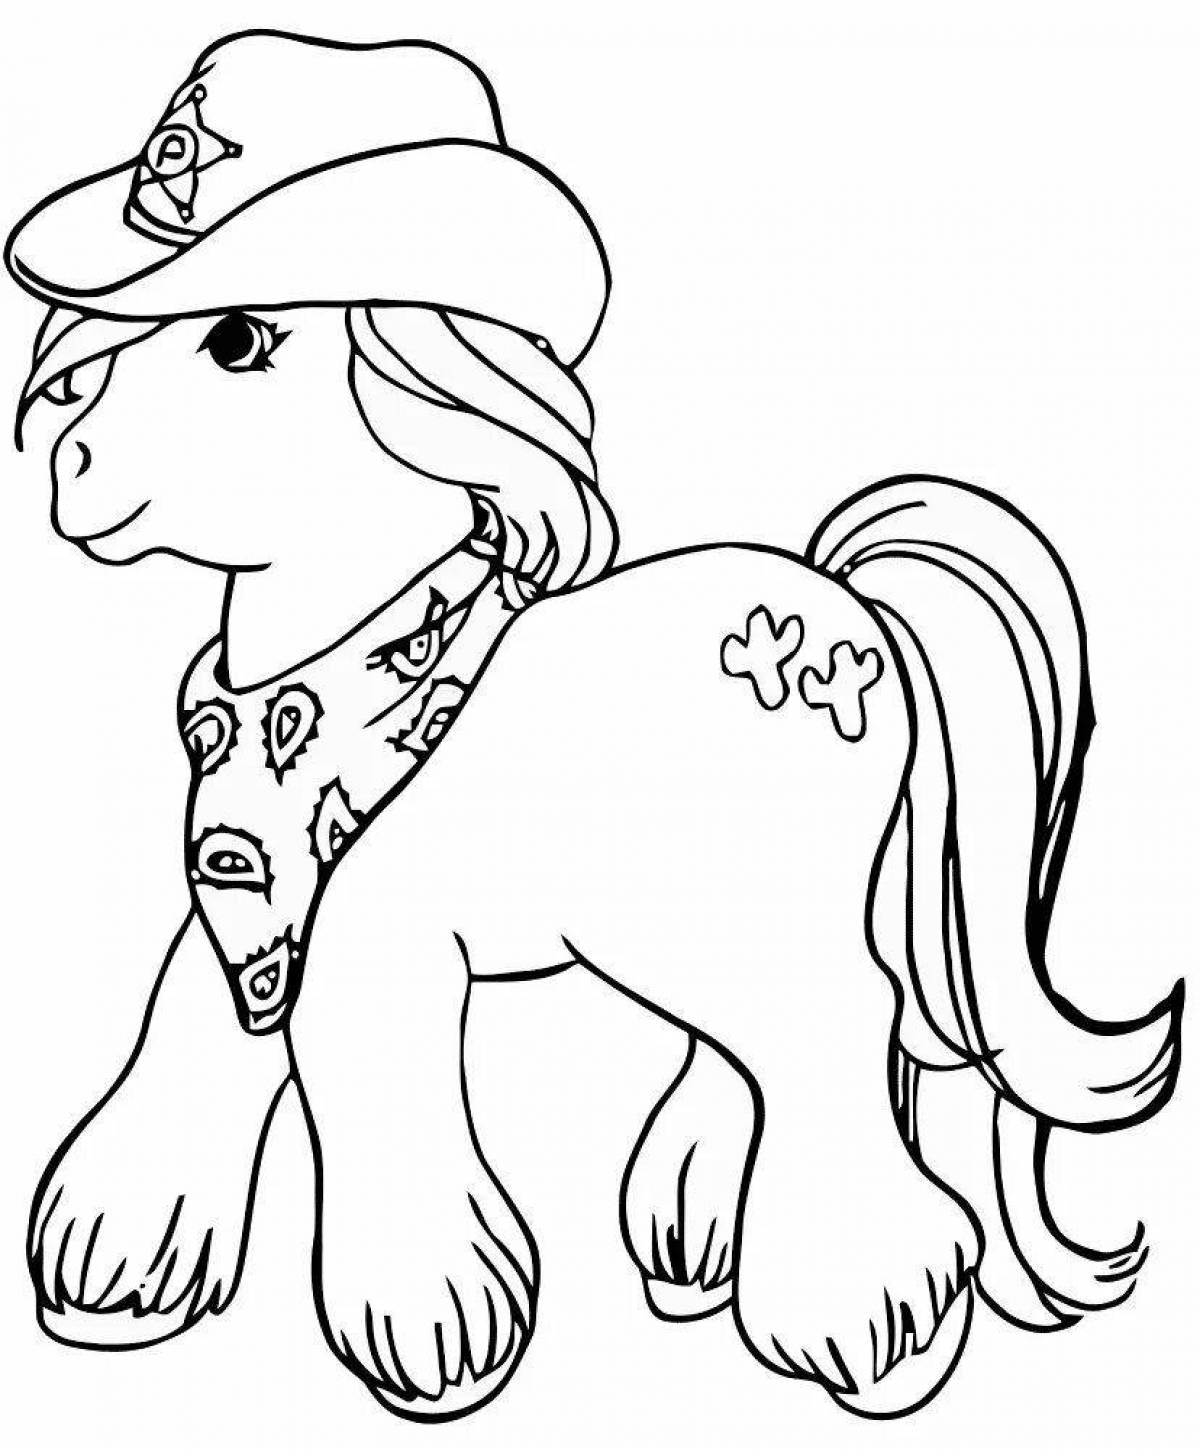 Energetic coloring pony horse